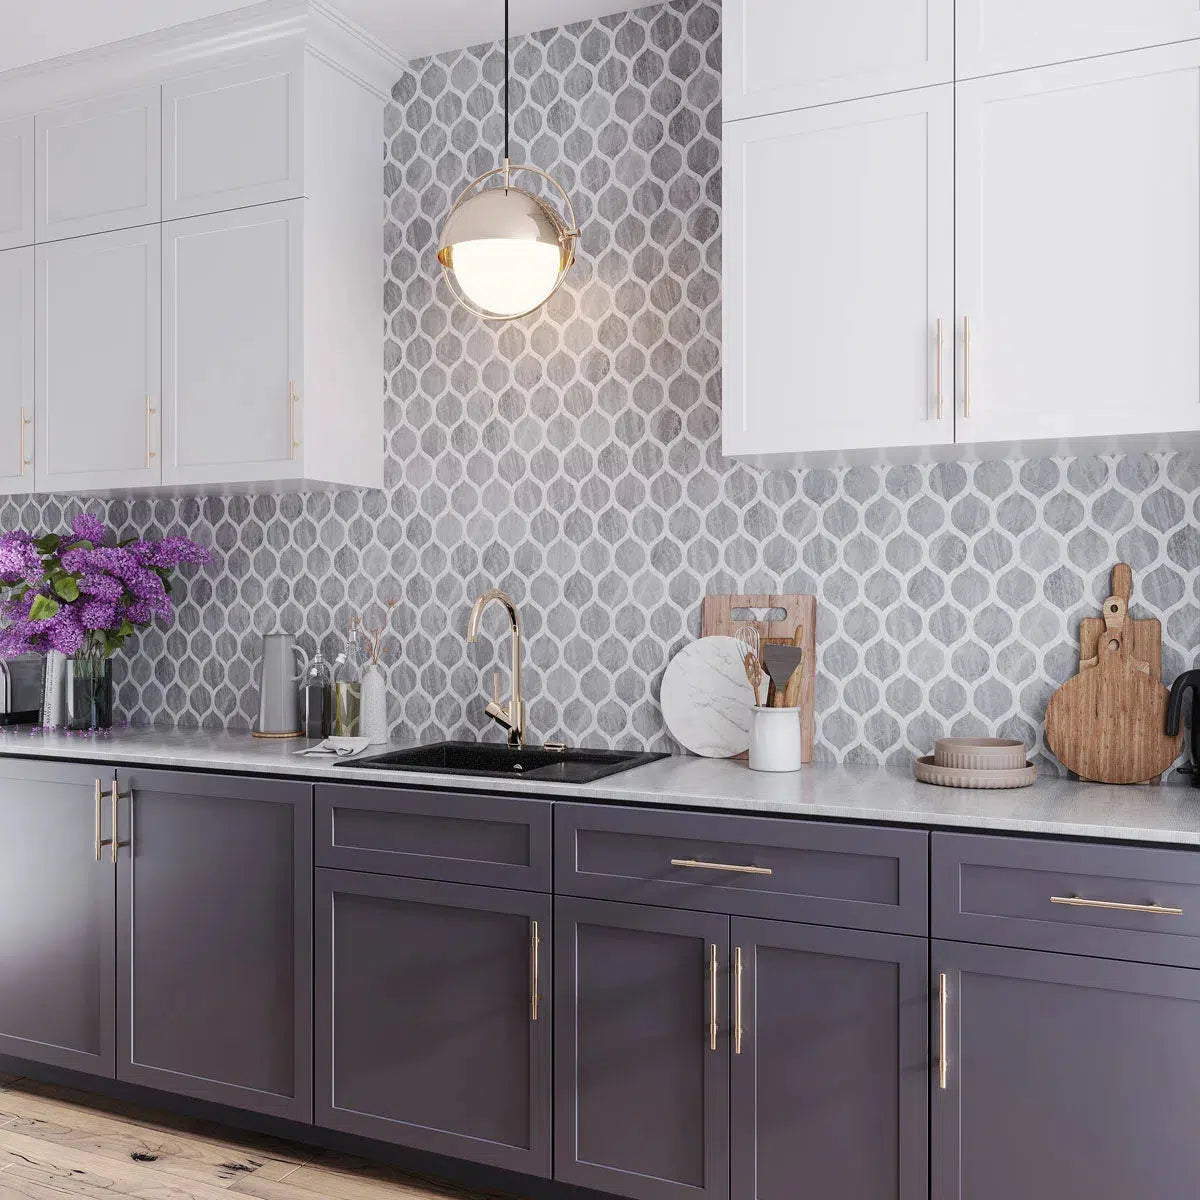 Gray, white, and blue kitchen with a patterned tile backsplash